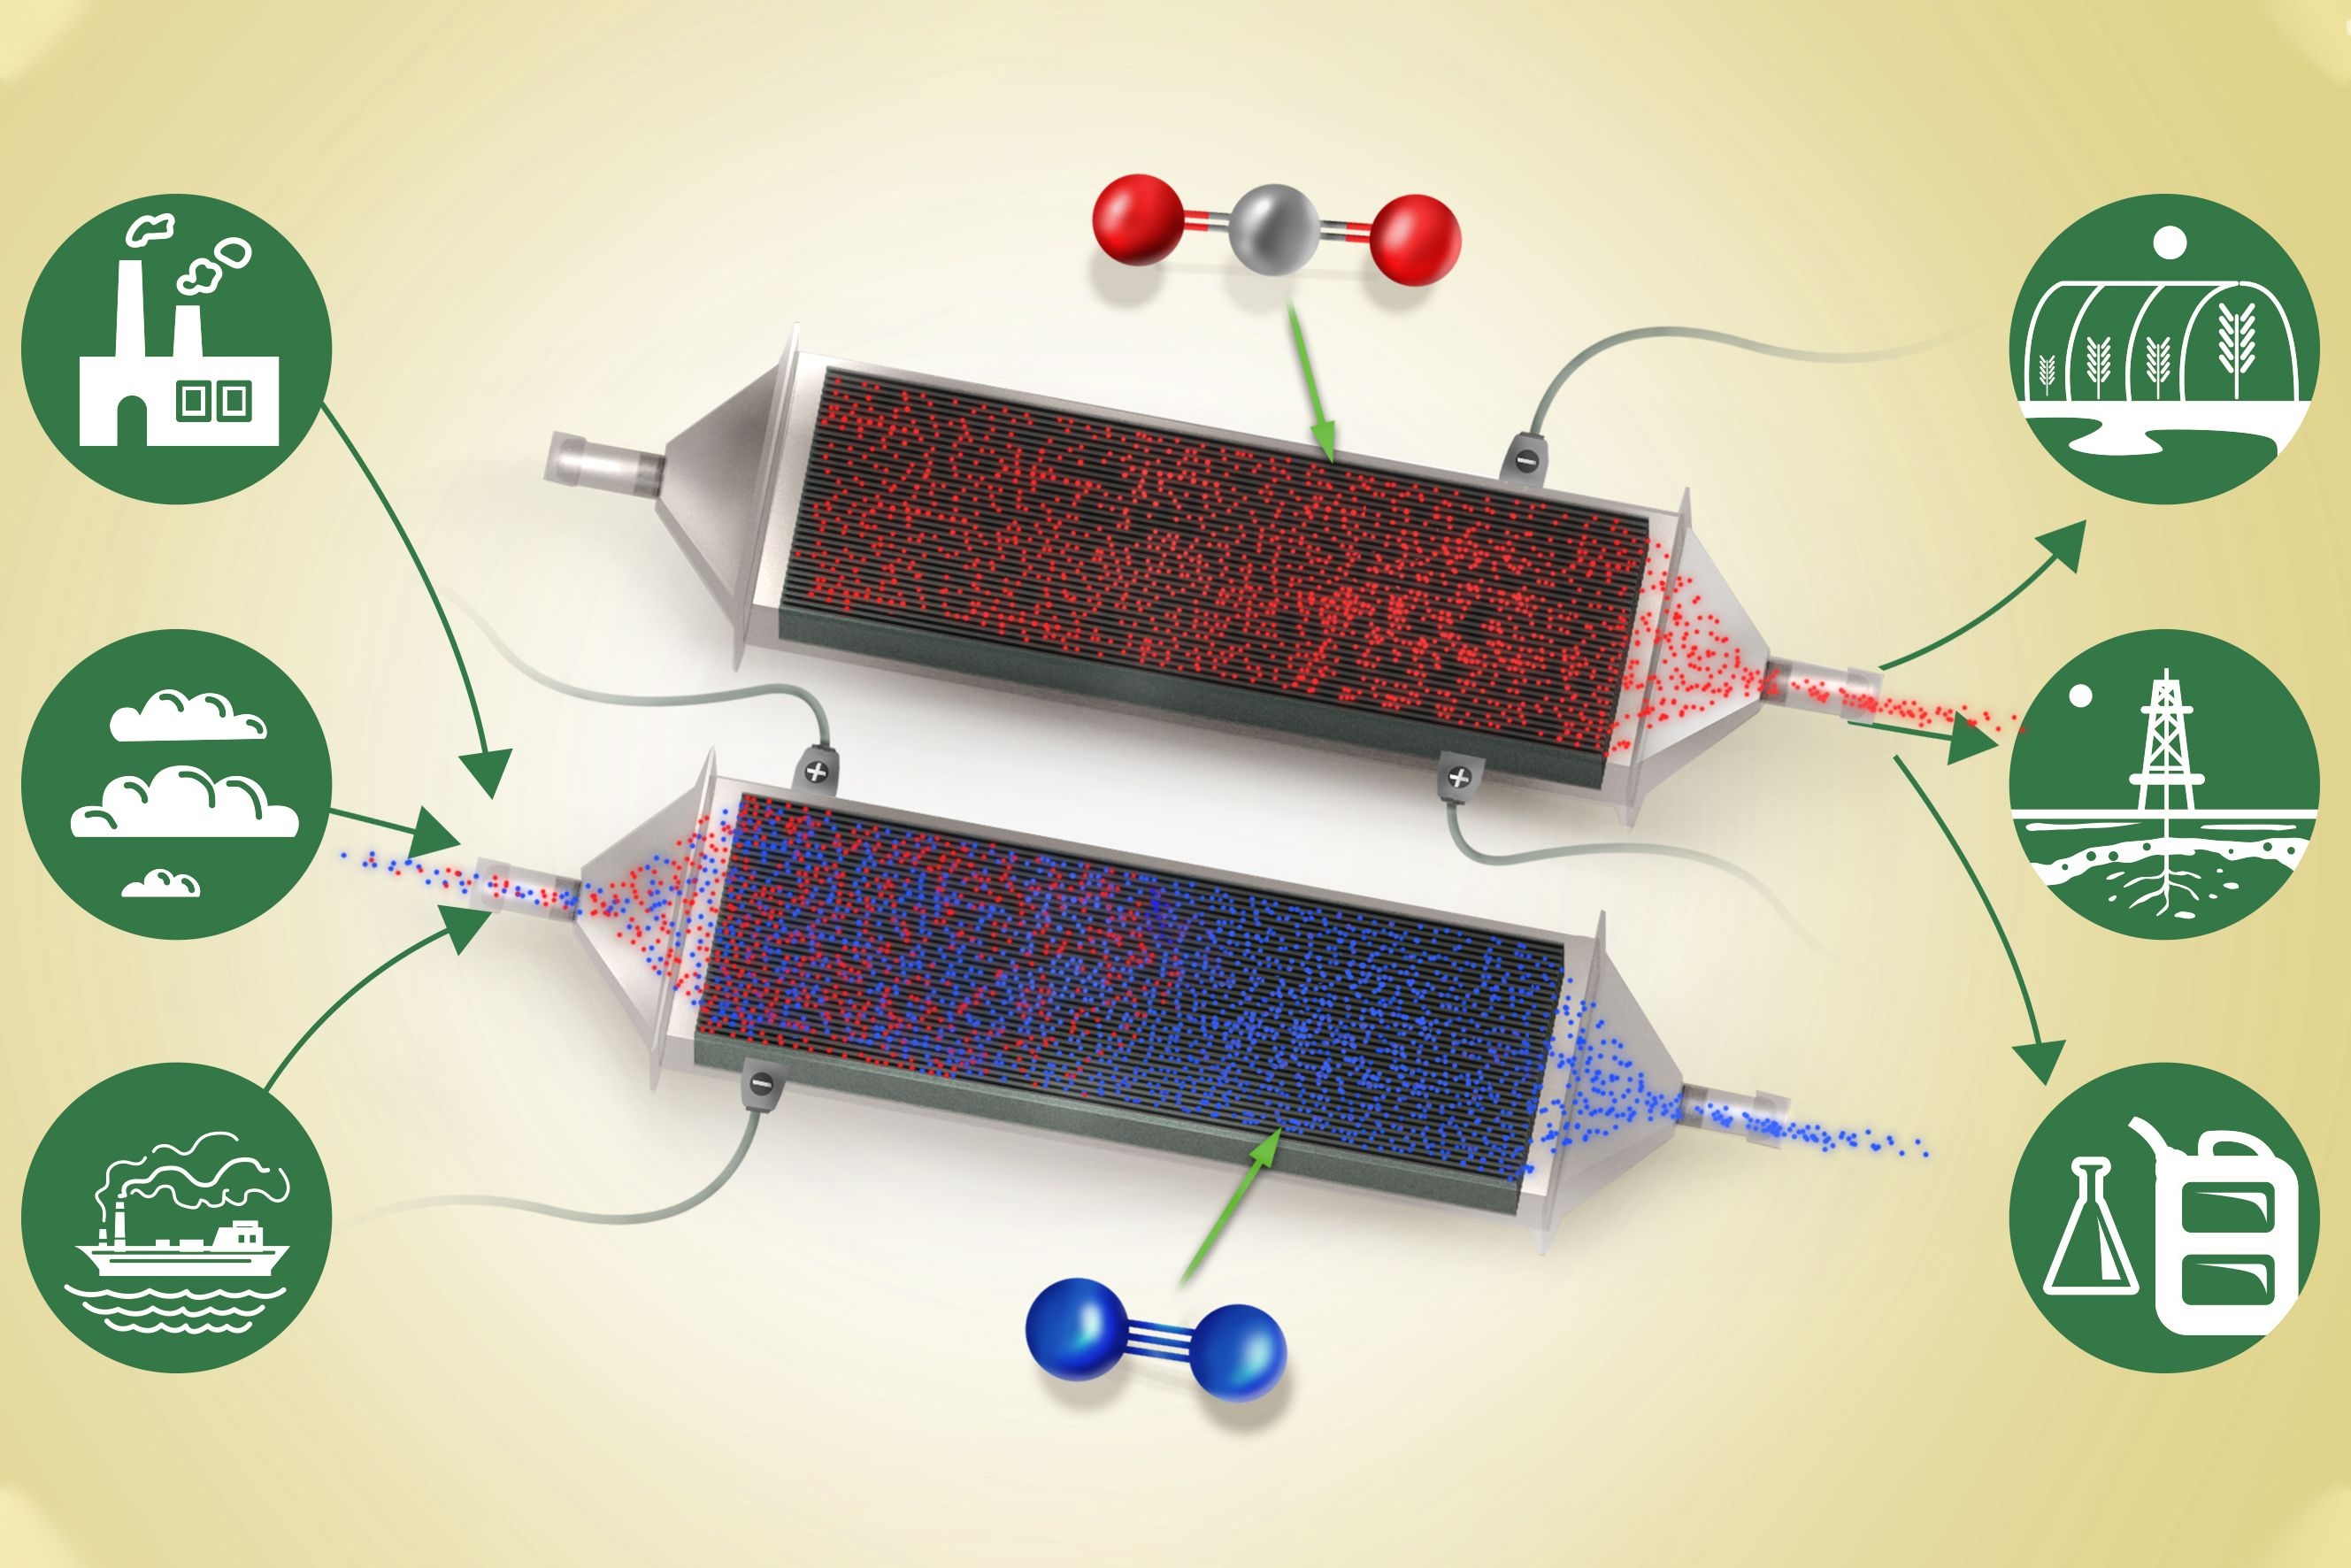 First developed at MIT, the technology enabled by Verdox enables a flow of air or flue gas (blue) containing carbon dioxide (red) to enter the system from the left. As it passes between thin battery electrode plates, carbon dioxide attaches to the charged plates while the cleaned airstream passes on through and exits at right.